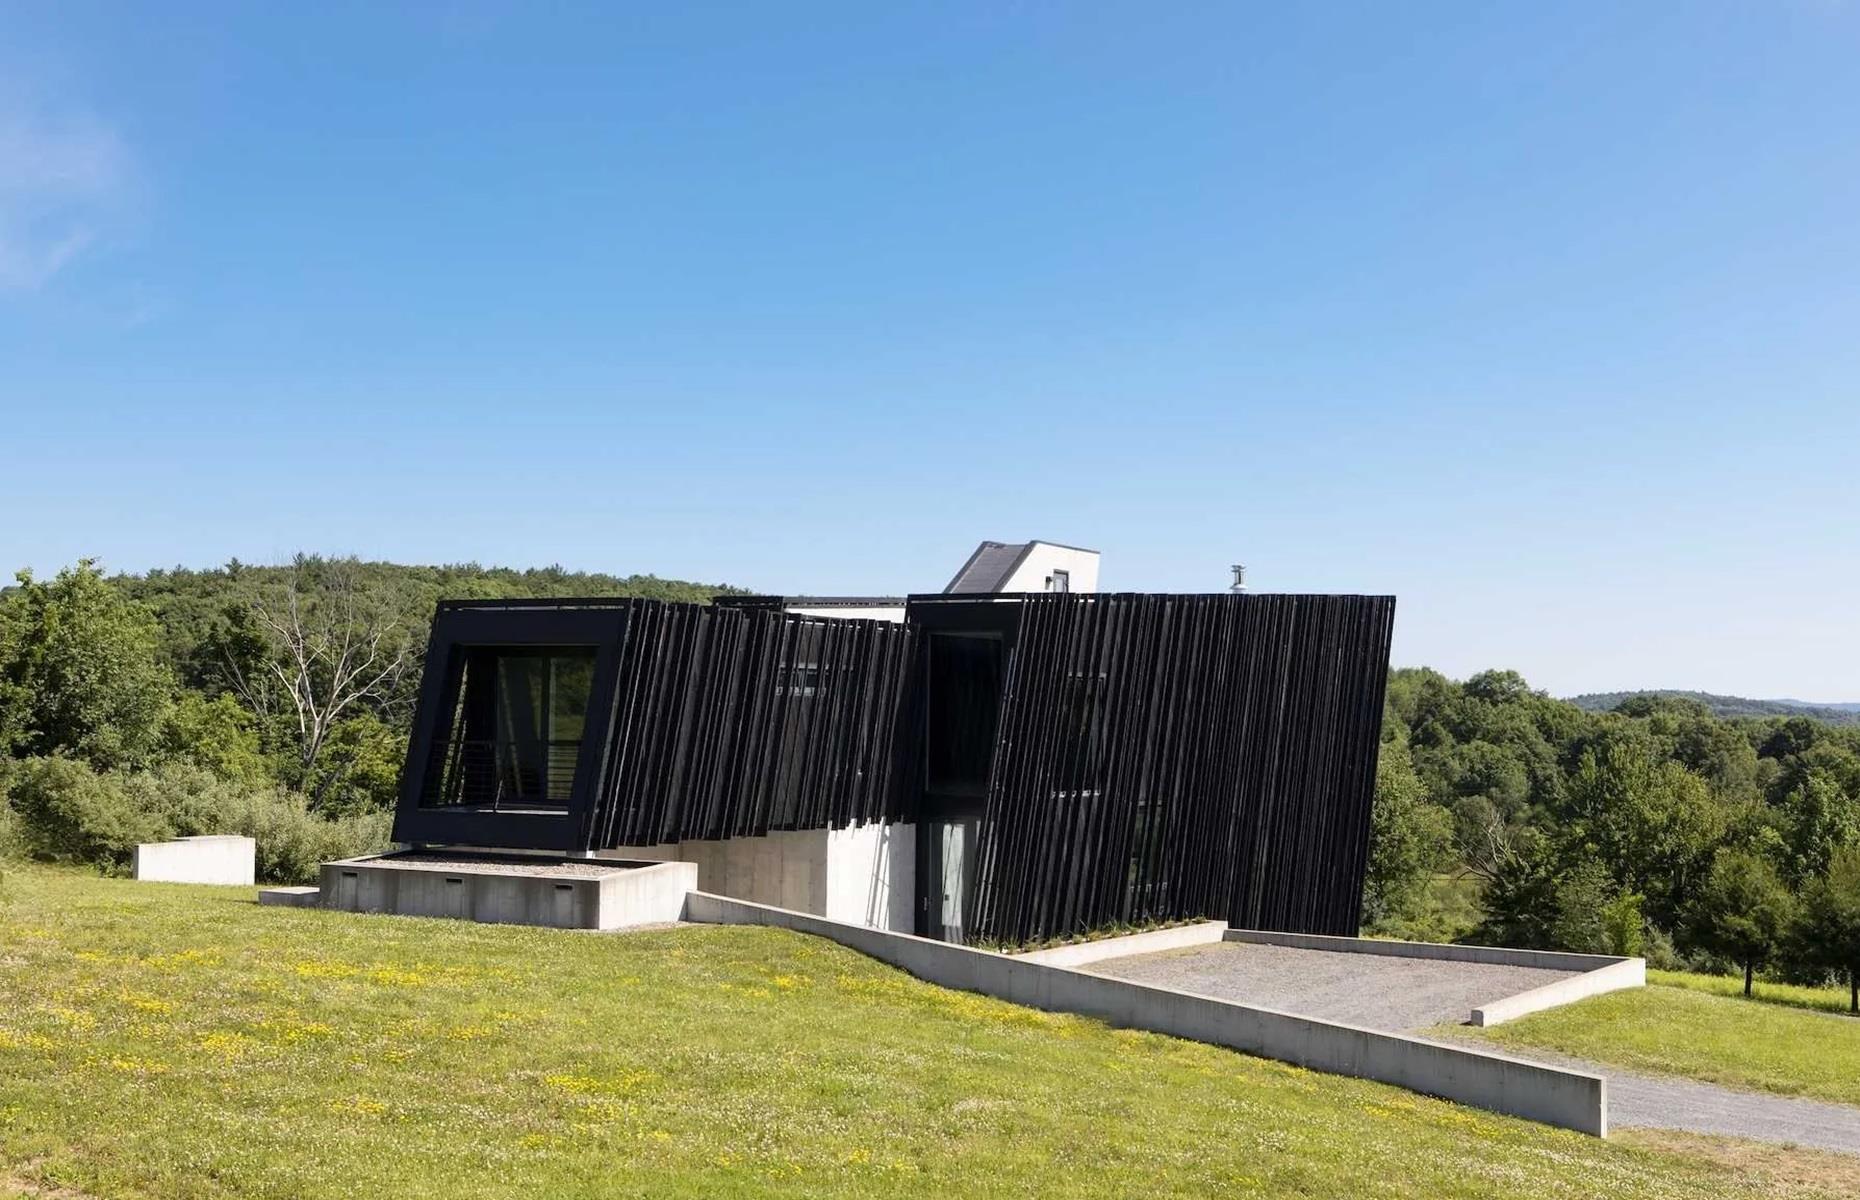 <p>Positioned on a 46-acre sloping plot, with dramatic views of the Catskills Mountains, the house was built to slot into its surroundings. According to <a href="https://www.realtor.com/news/unique-homes/sleeve-house-new-york-catskills-modern/">Realtor</a>, the architect said the idea was to create "two elongated volumes – a smaller one sleeved into a larger – sitting on a cast-in-place concrete base." Charred Accoya wood wraps the house like a skin. As well as looking amazing, the wood sleeve acts as a waterproof, insect-proof and fire-retardant cover, ensuring the exterior will stand the test of time. The wood is also resistant to rot and decay.</p>